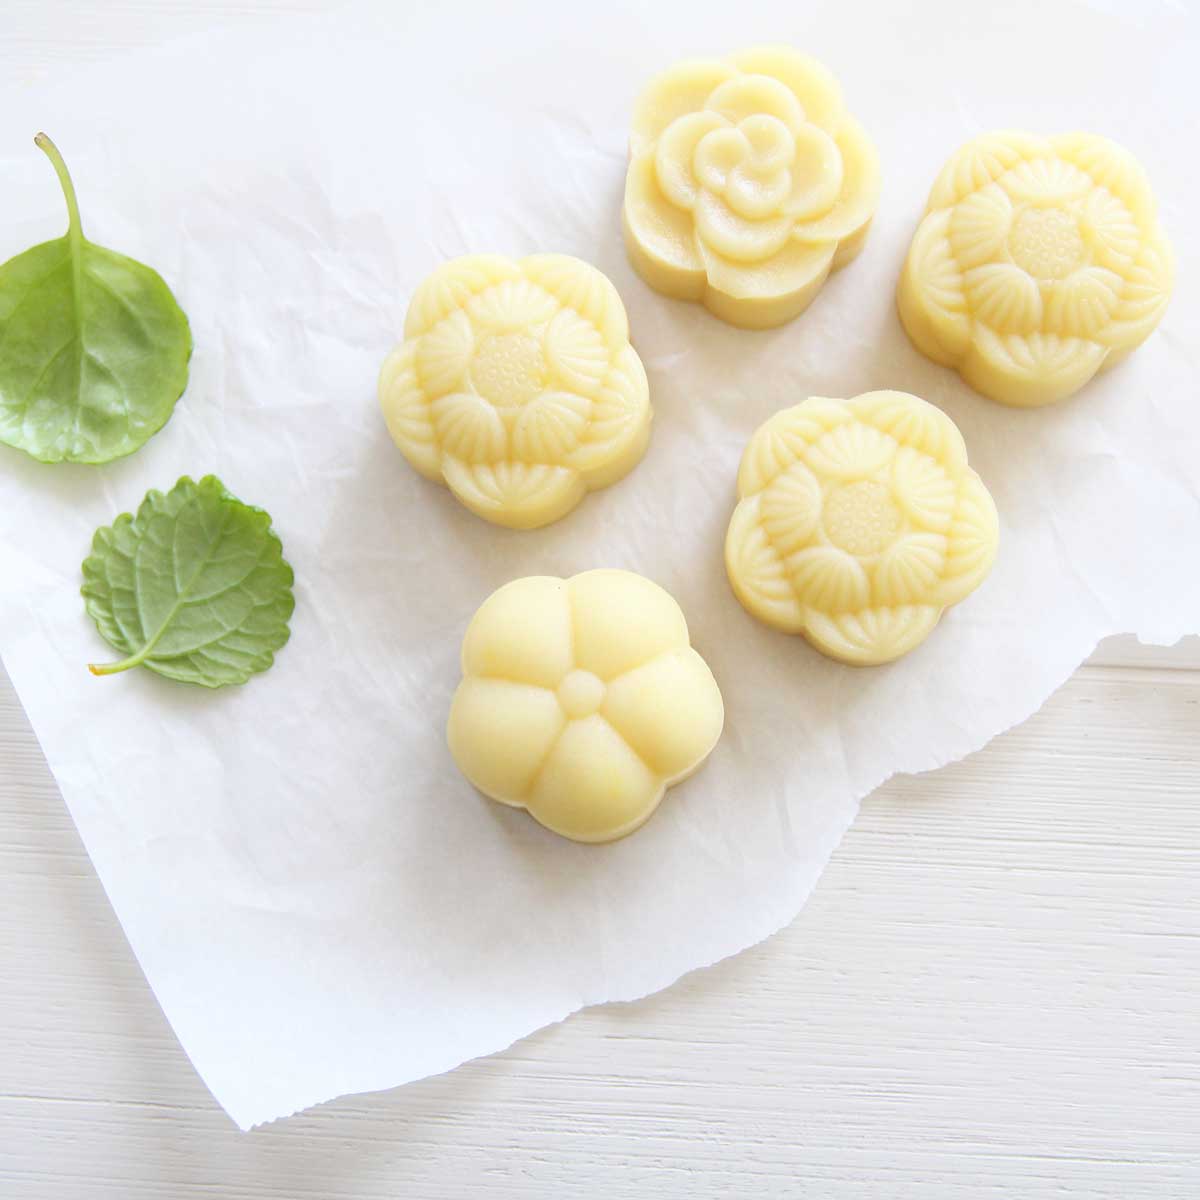 Homemade Durian Snow Skin Mooncakes with Mung Bean Filling - Strawberry Japanese Roll Cake